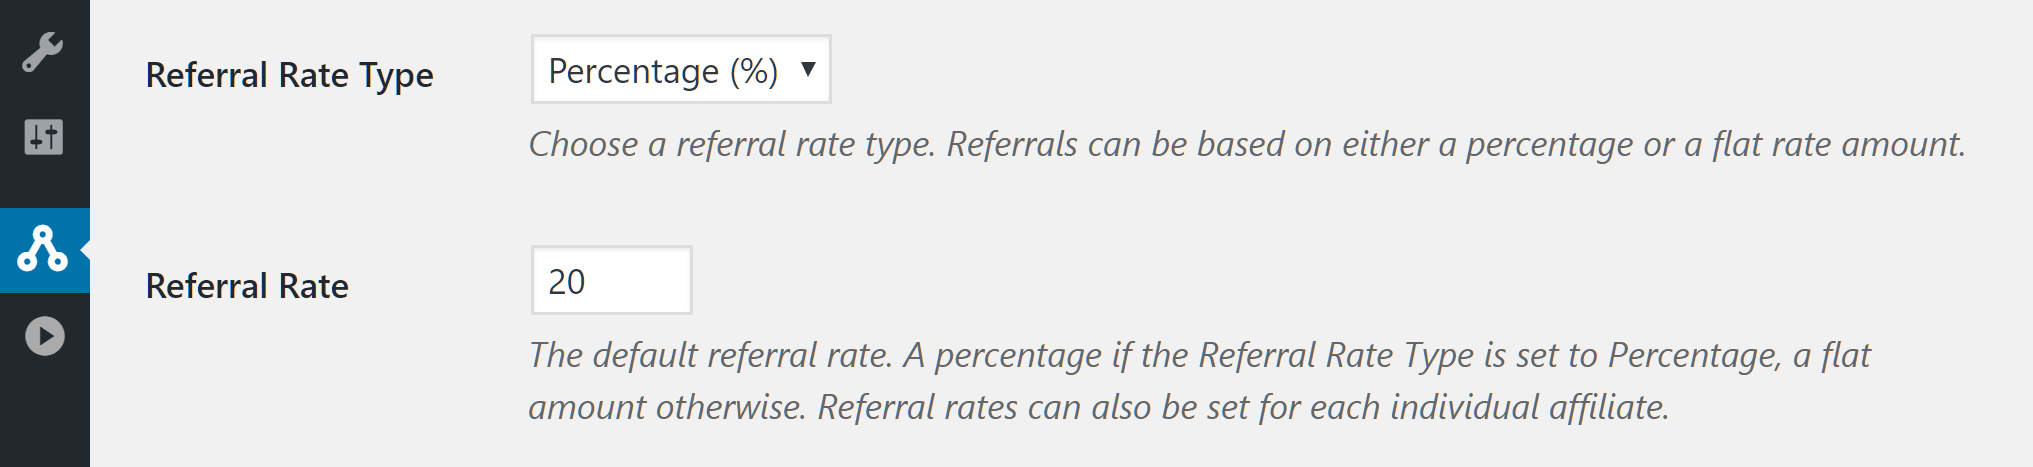 Set the referral rate and type